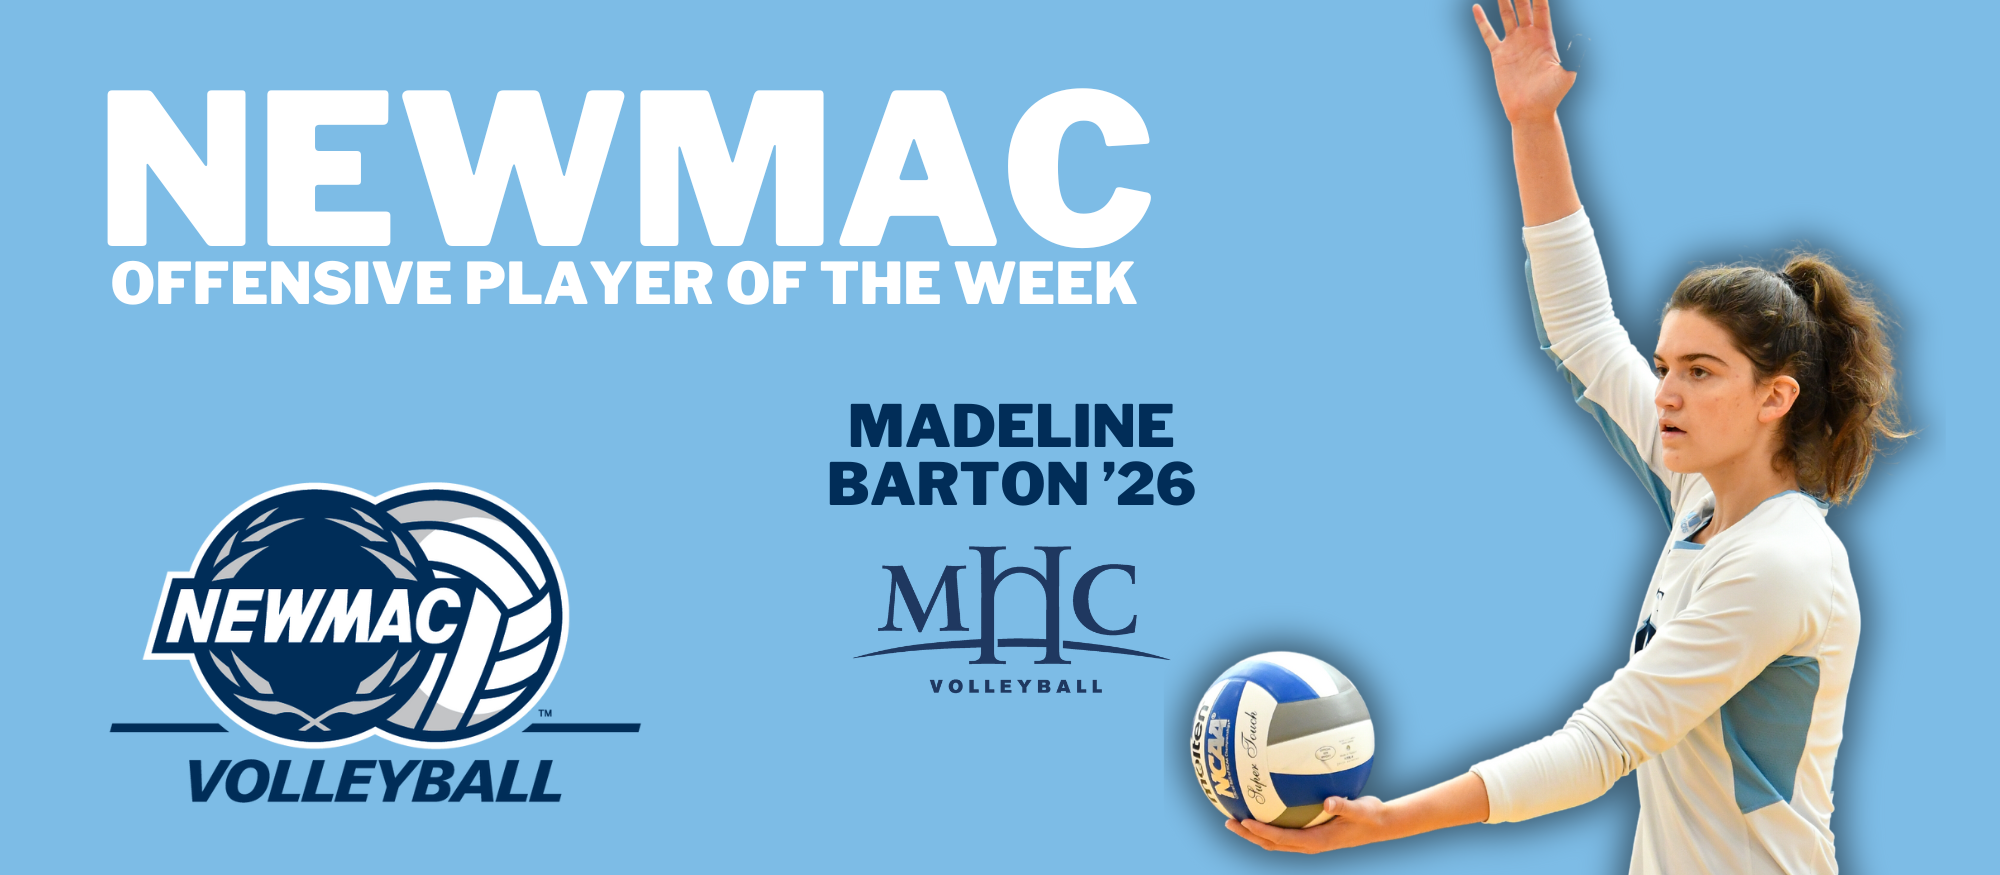 Barton named NEWMAC Volleyball Offensive Player of the Week